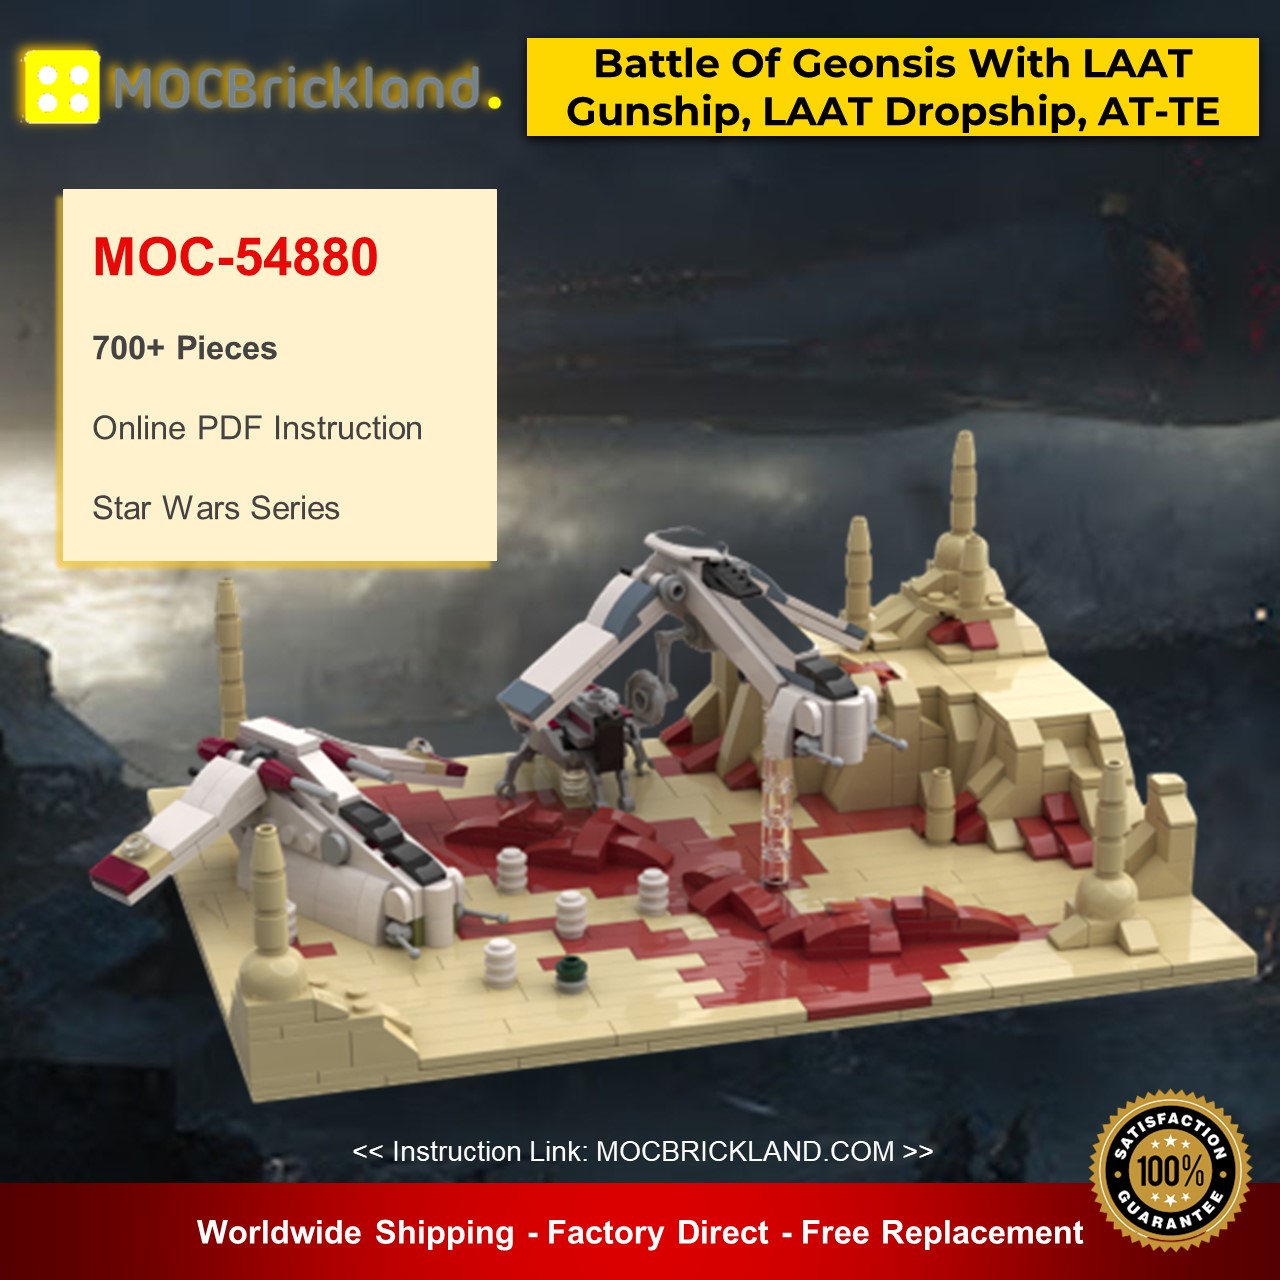 MOC-54880 Battle Of Geonsis With LAAT Gunship, LAAT Dropship And AT-TE Star Wars Designed By Red5-Leader With 700 Pieces 